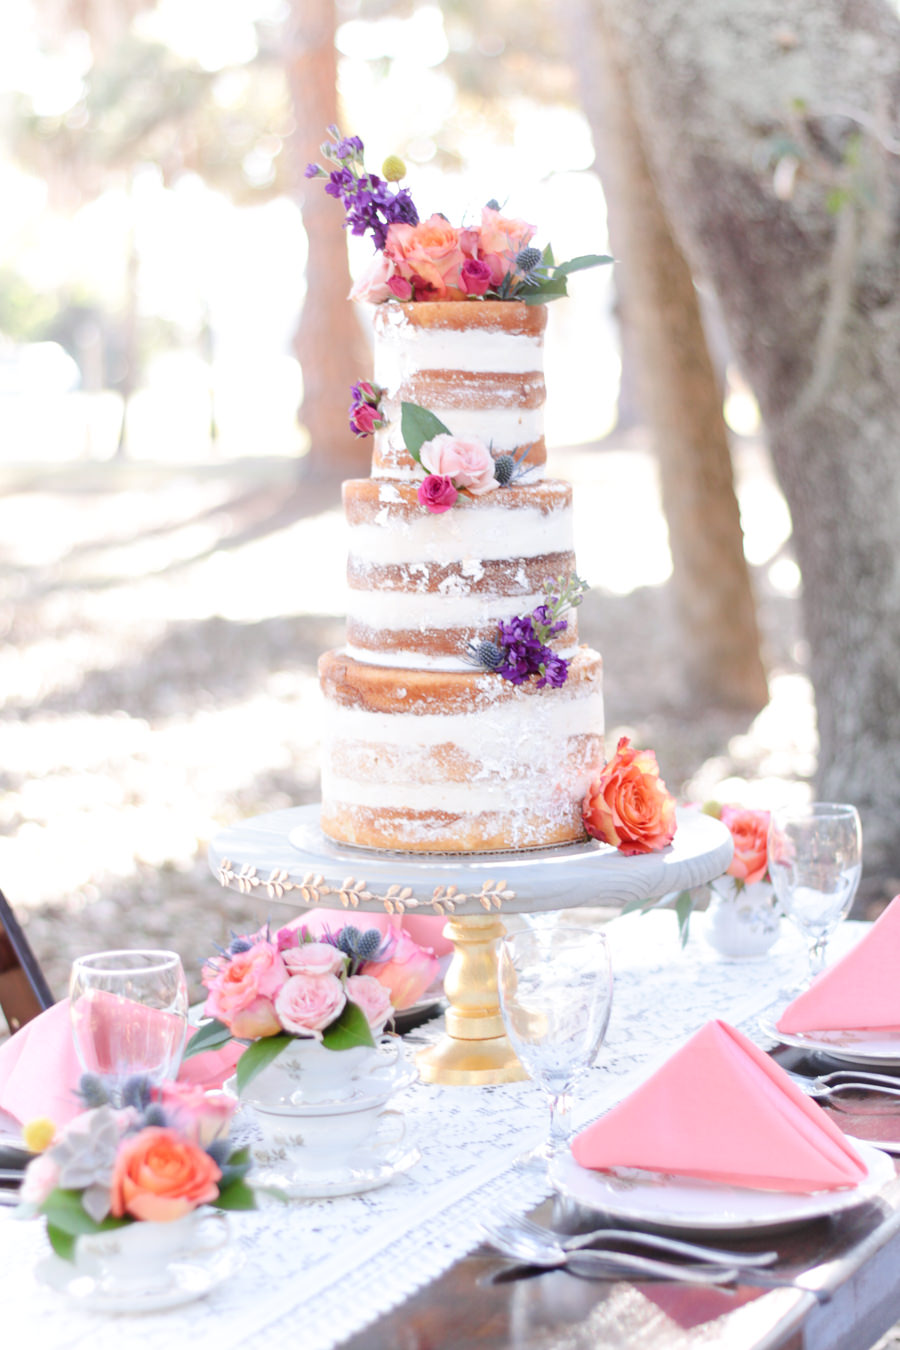 Outdoor Park Wedding Reception with Three Tier Round Naked Wedding Cake with Tropical Flowers, Table Decor with Lace Runner, Low Blush, Peach, Thistle and Succulent with Greenery Centerpiece, and Coral Napkins